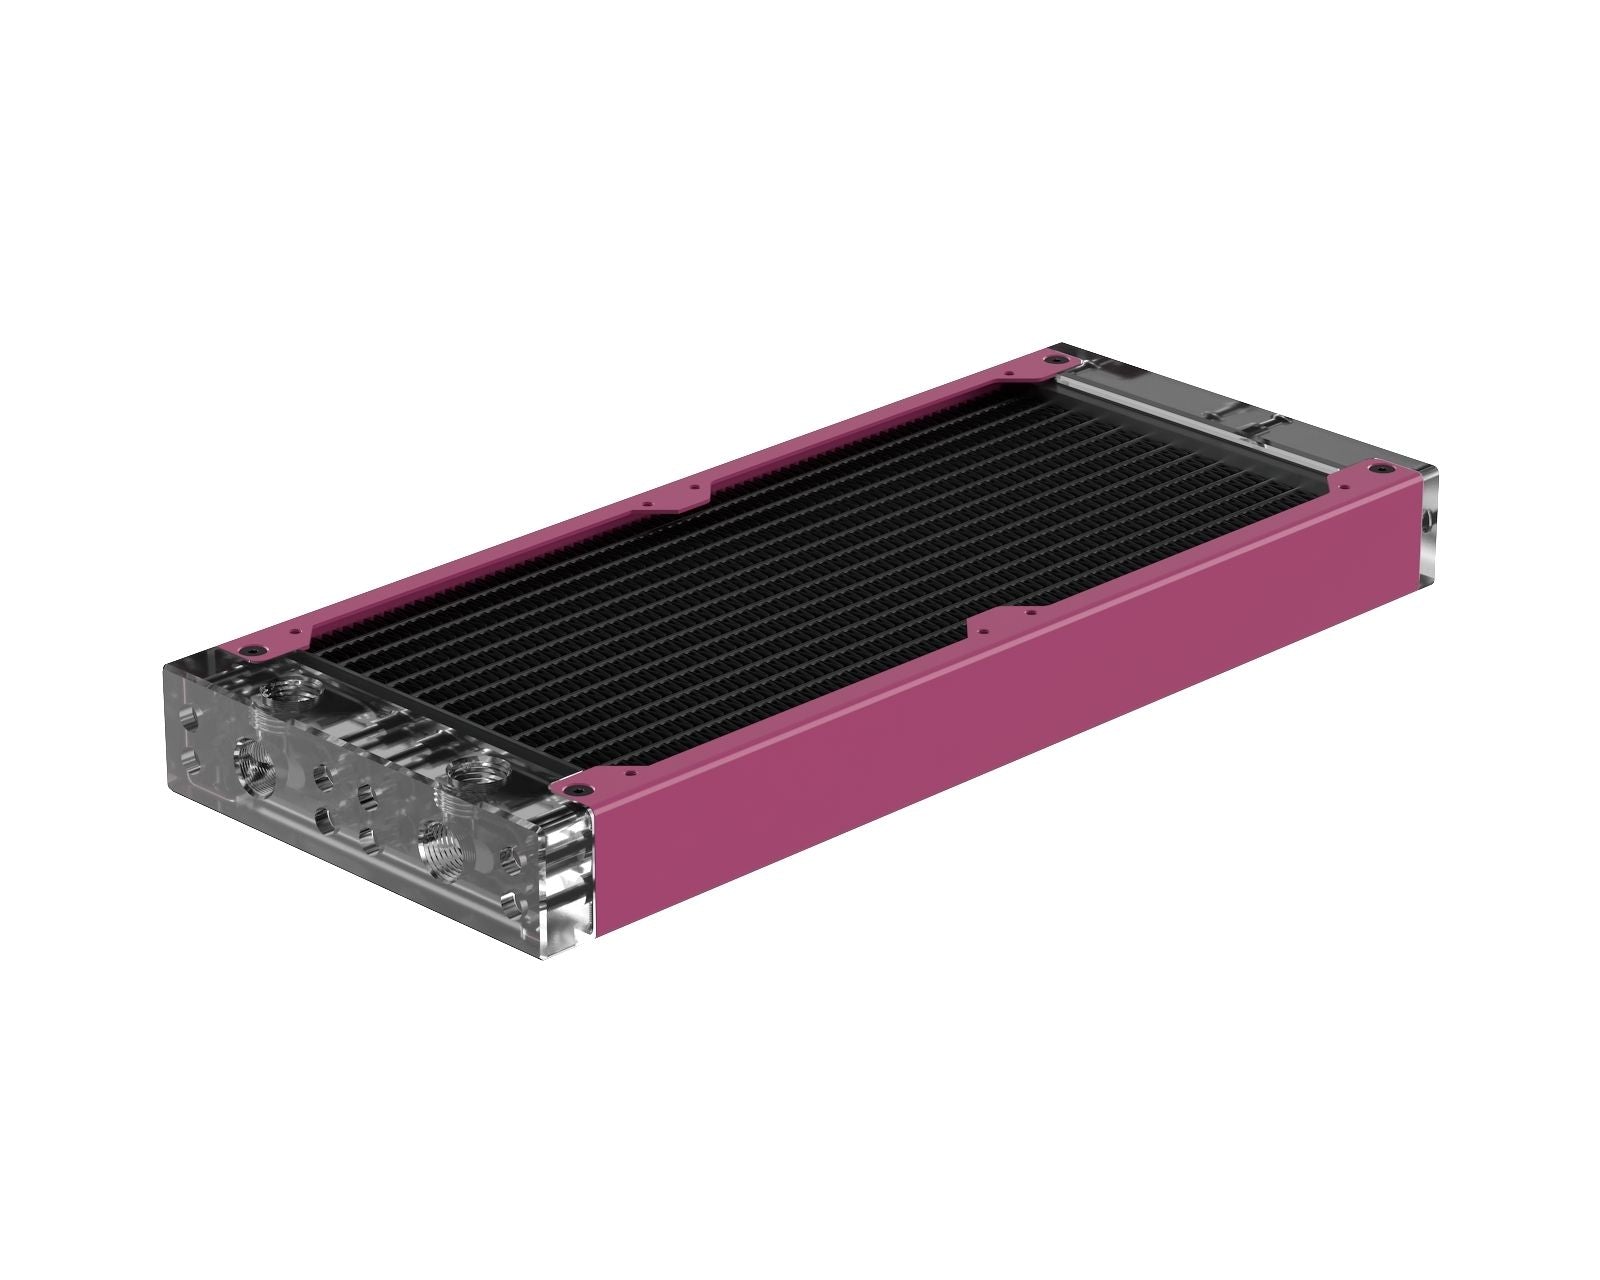 PrimoChill 240SL (30mm) EXIMO Modular Radiator, Clear Acrylic, 2x120mm, Dual Fan (R-SL-A24) Available in 20+ Colors, Assembled in USA and Custom Watercooling Loop Ready - Magenta